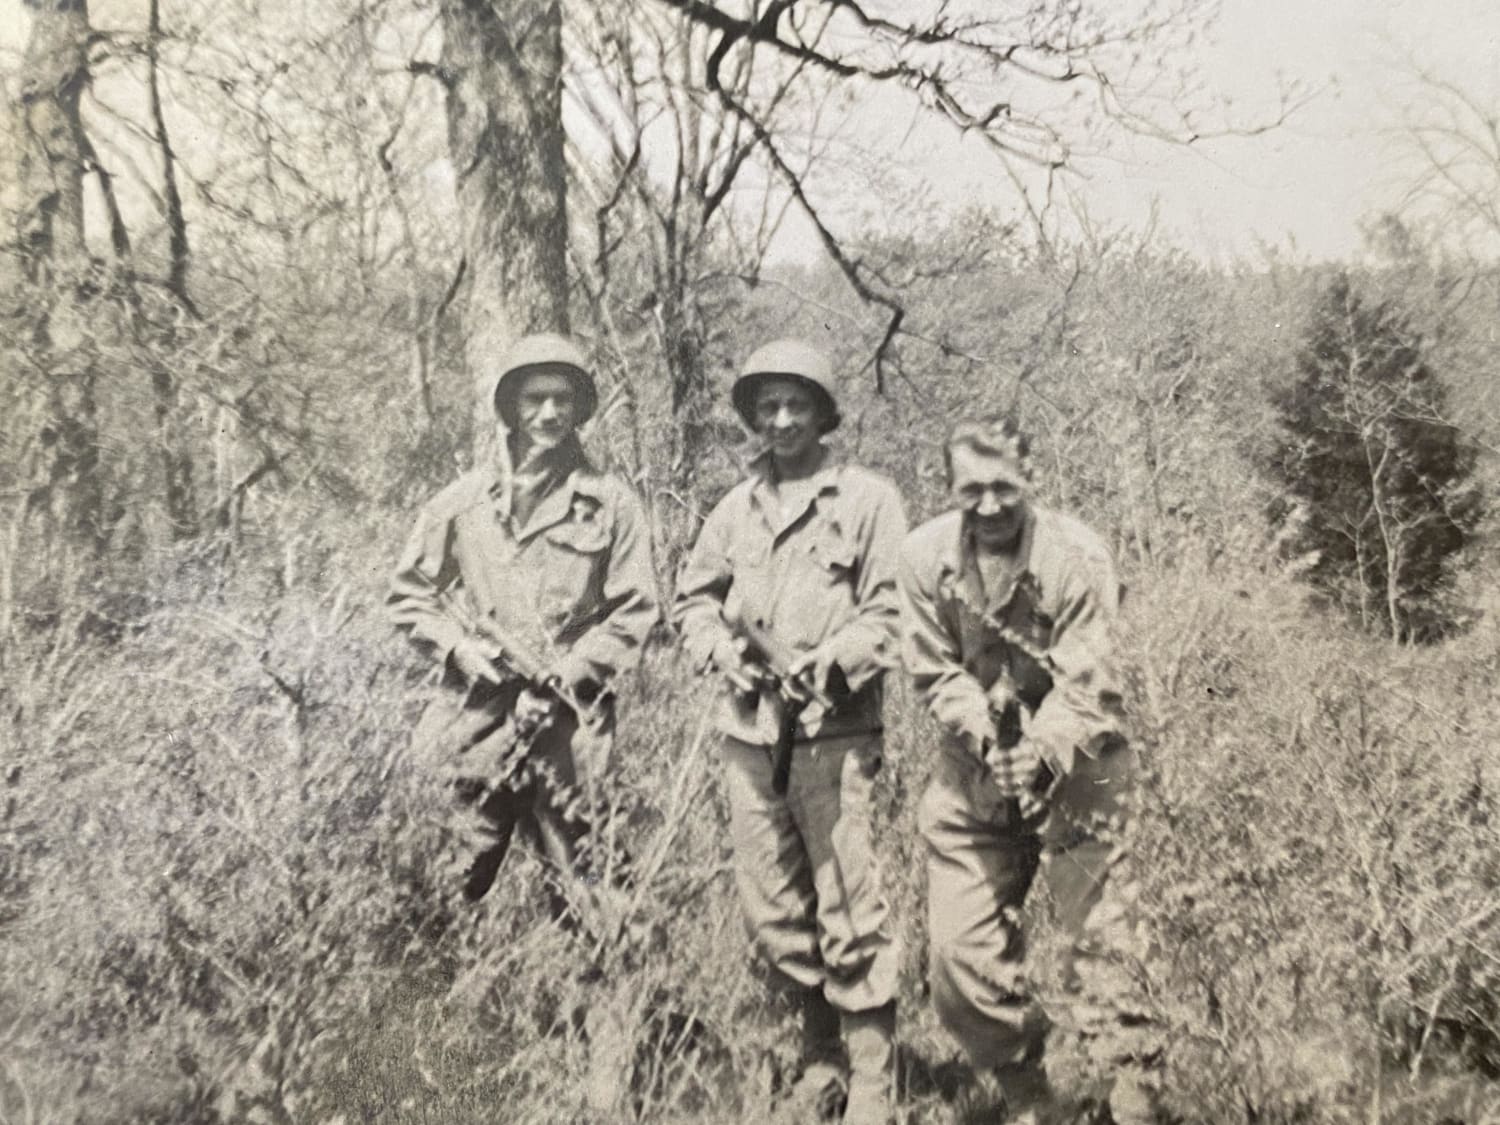 My father in the middle with 2 of his buddies in WW II